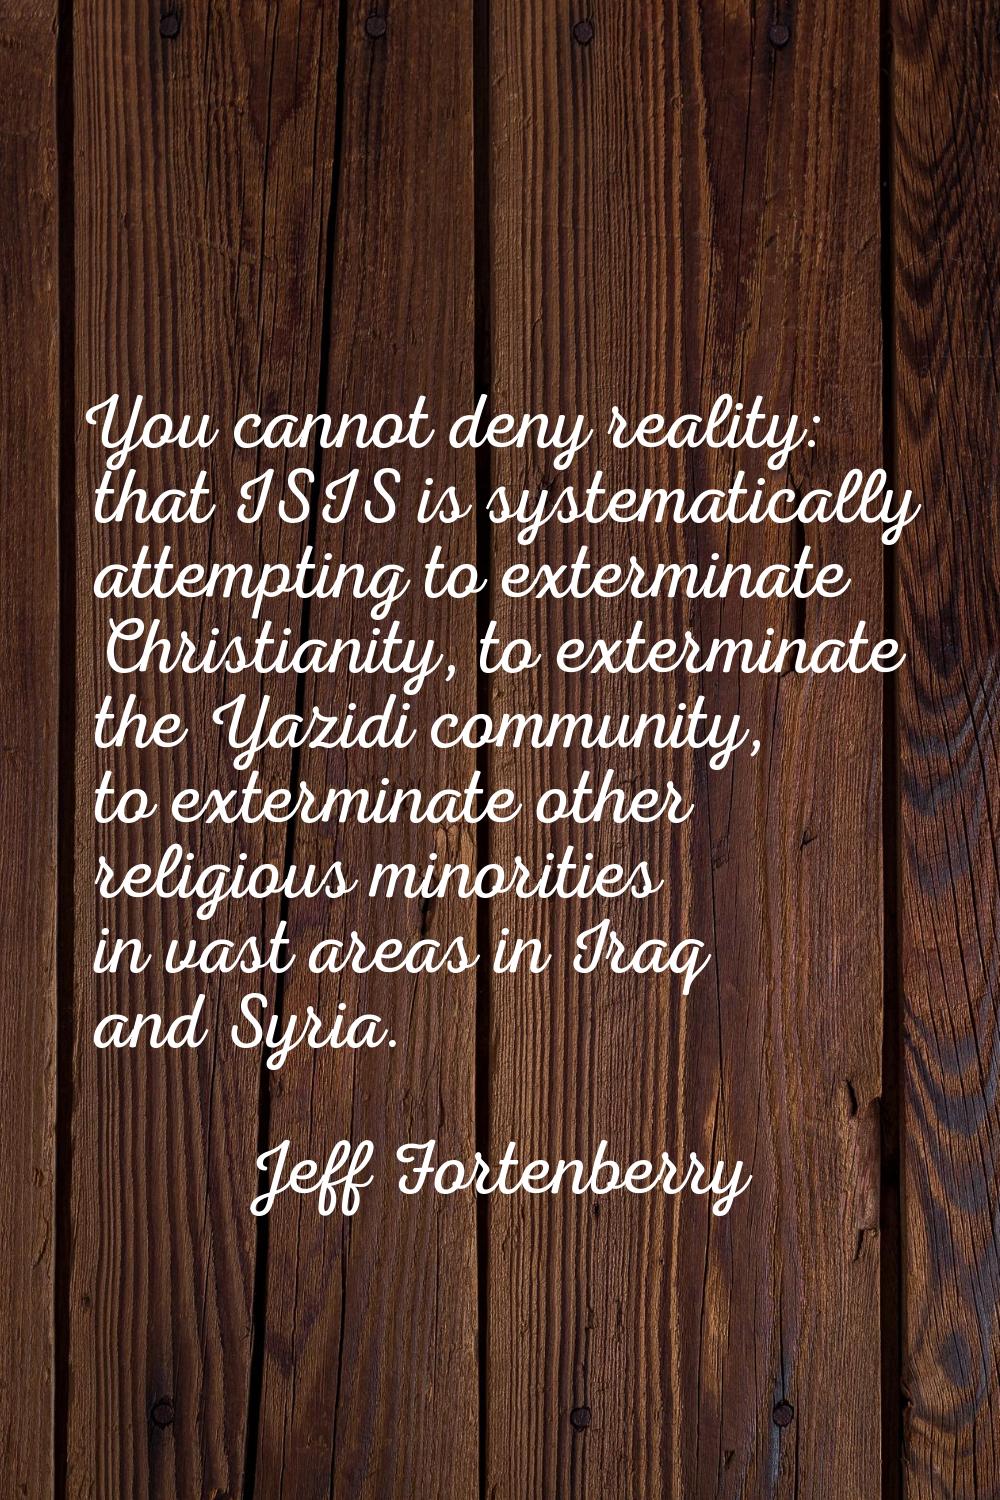 You cannot deny reality: that ISIS is systematically attempting to exterminate Christianity, to ext